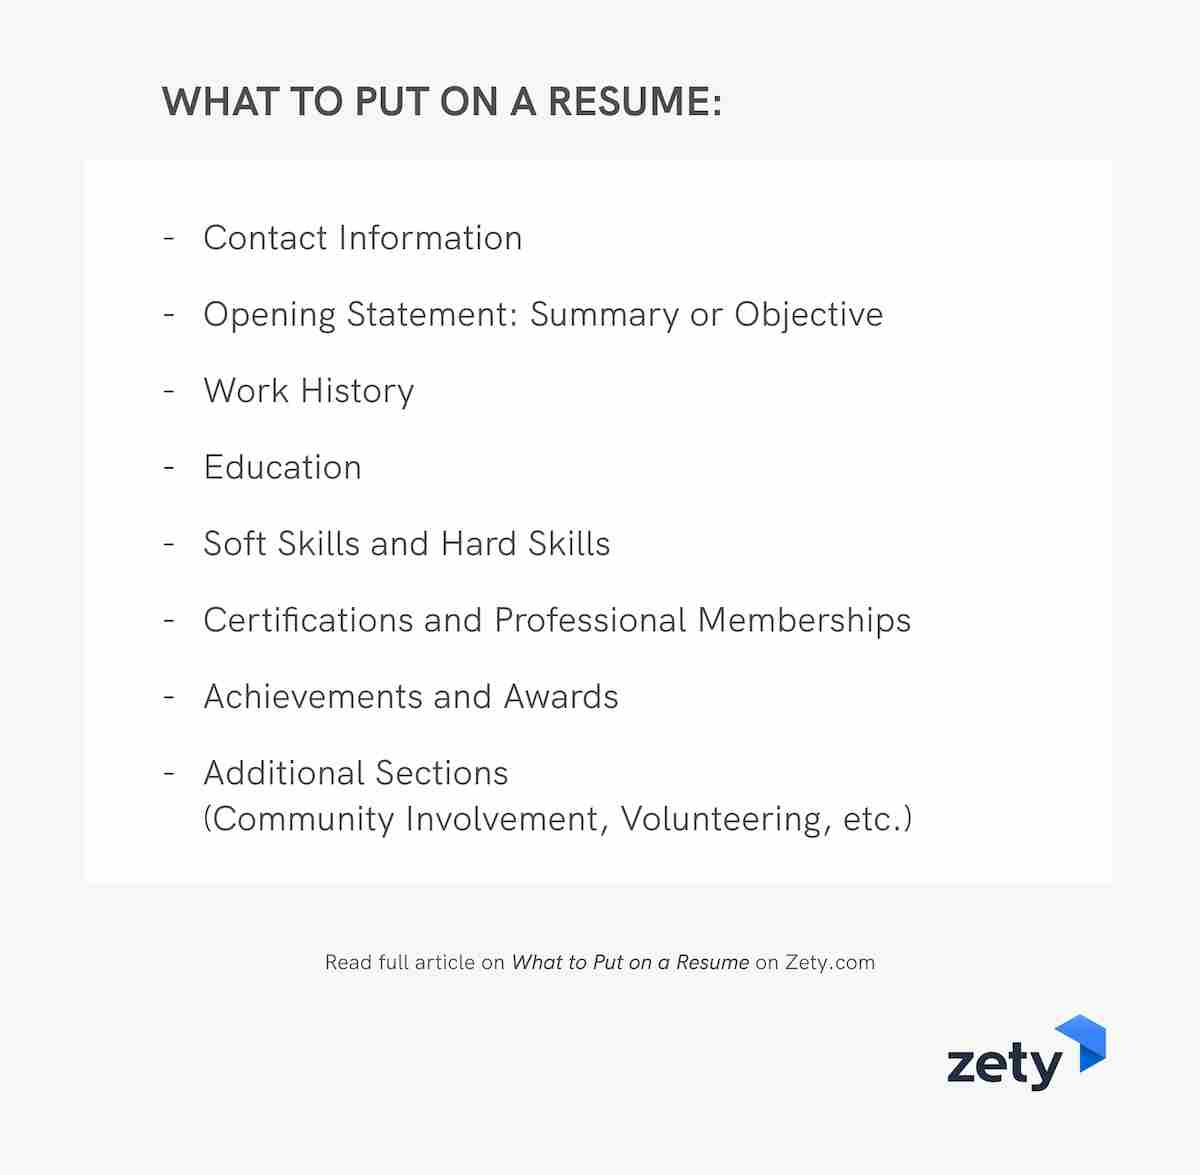 What to Put on a Resume: Good Things You Should Include